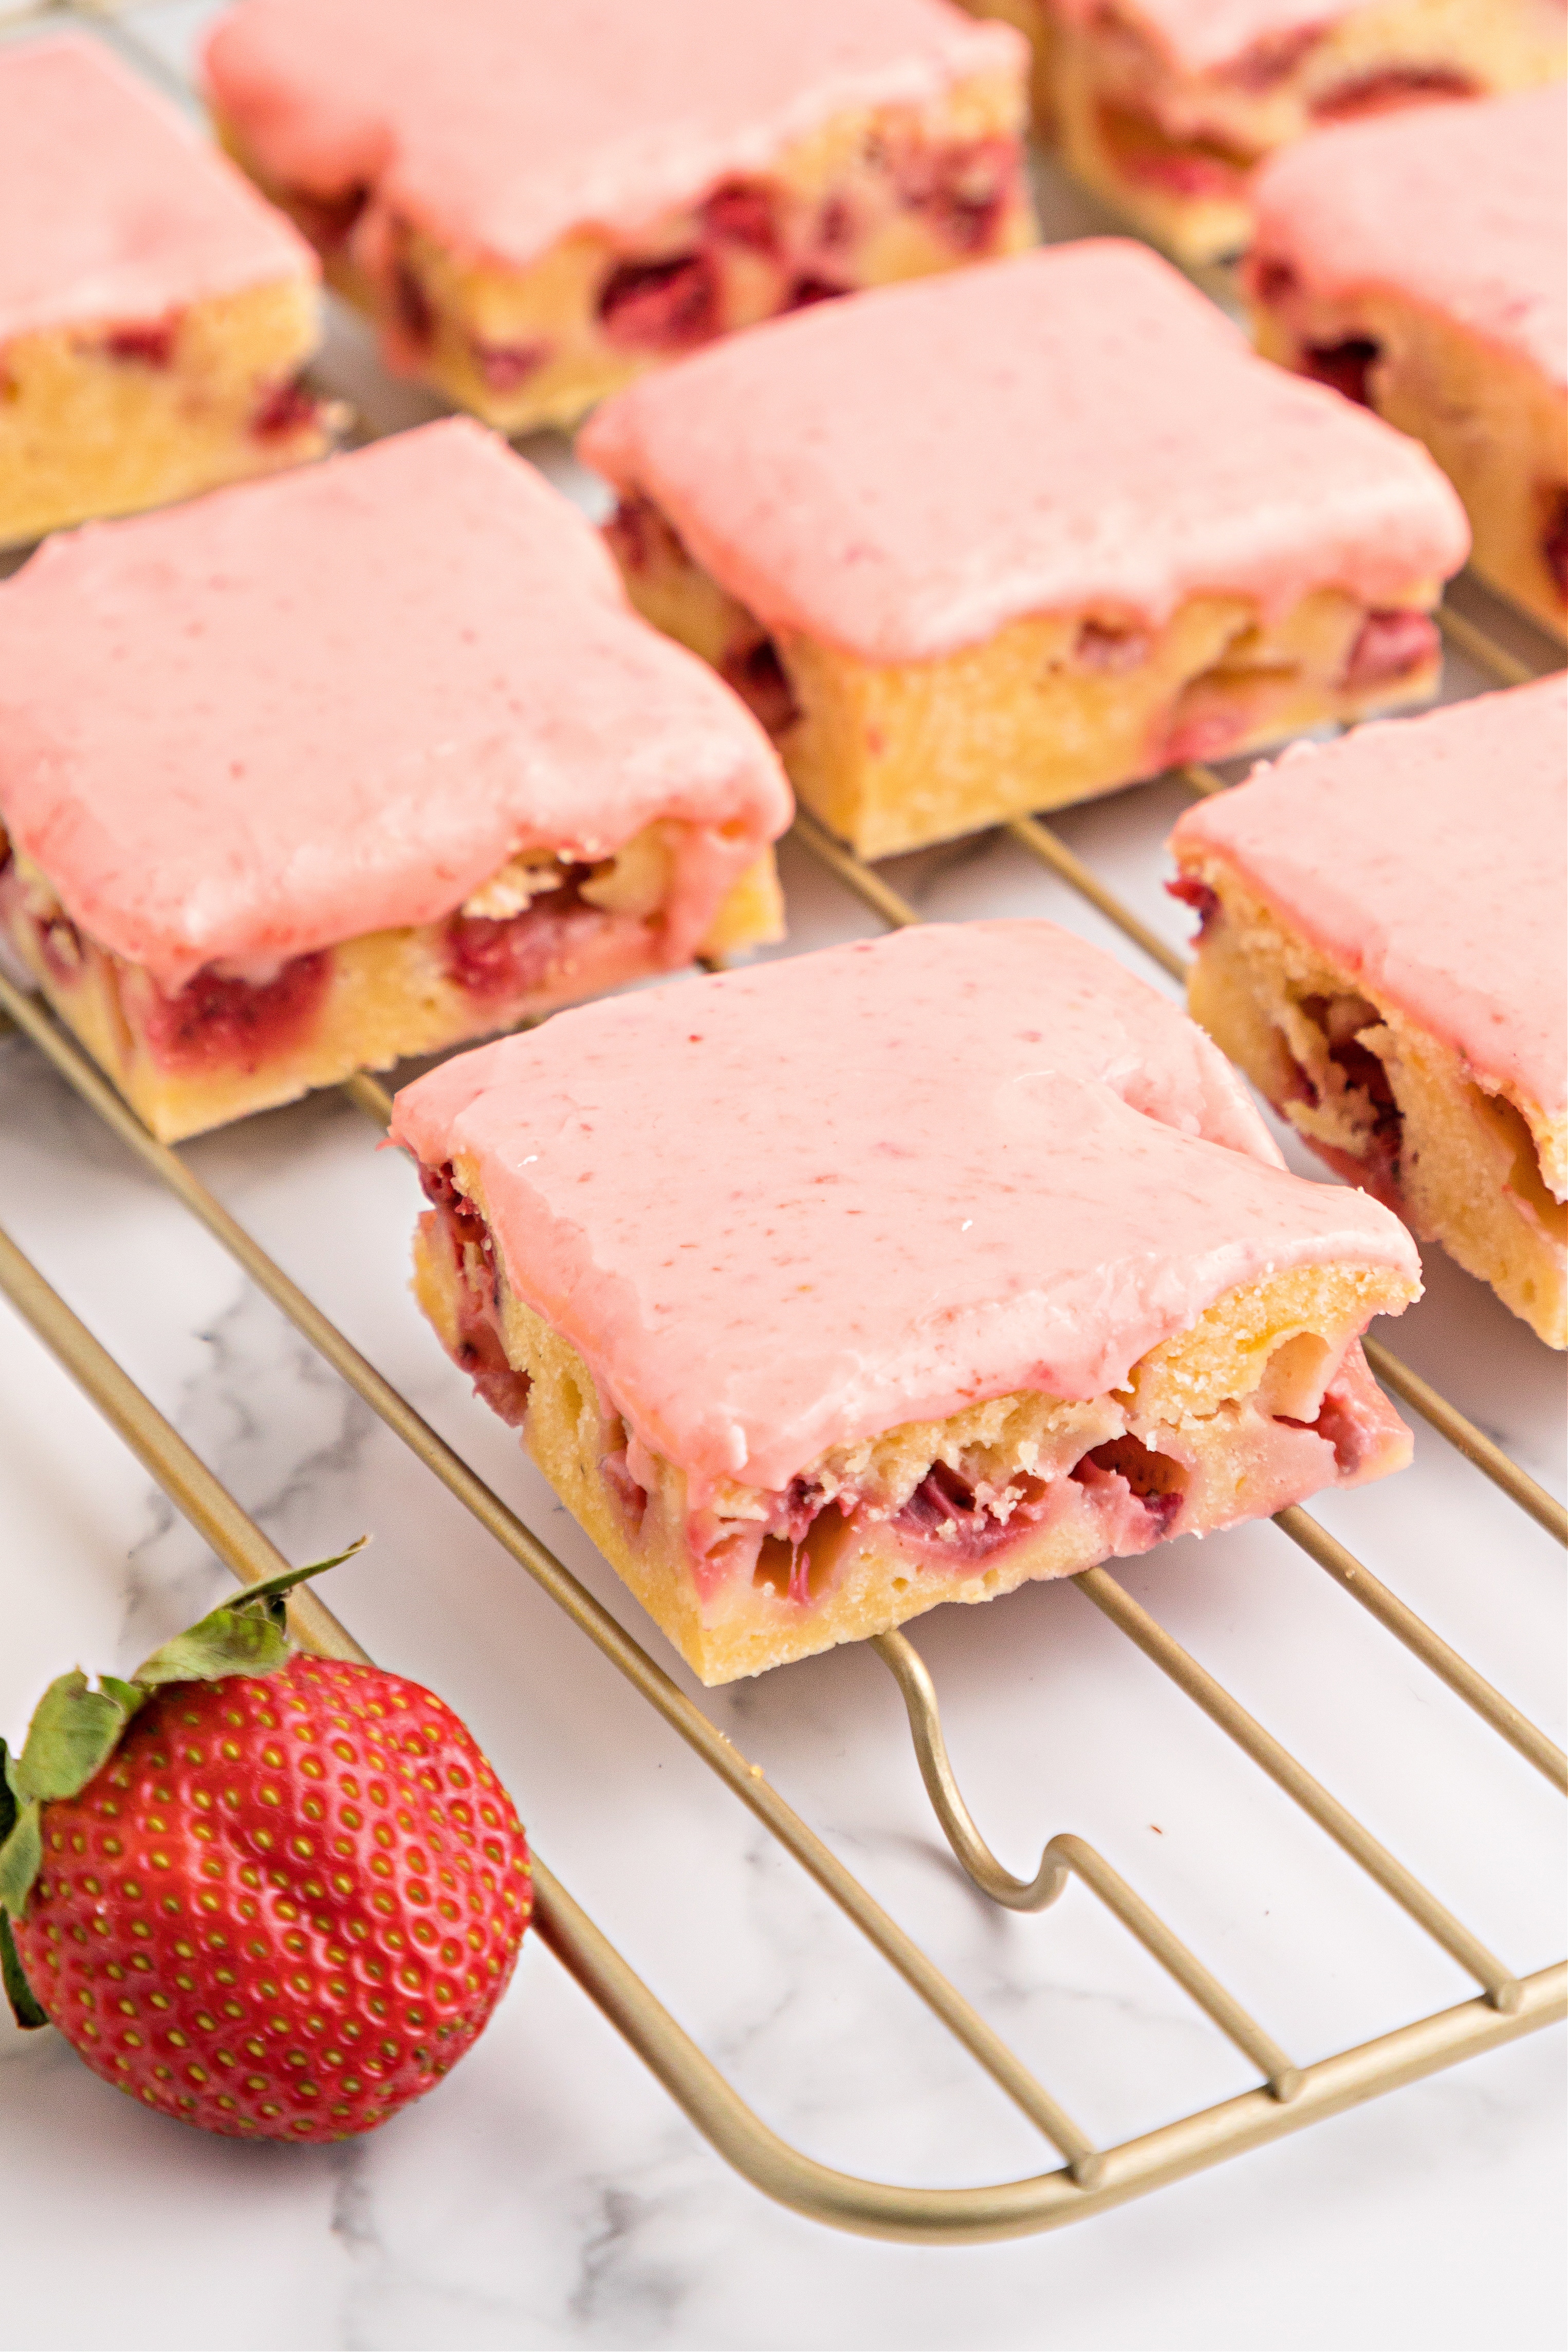 Blondies with strawberry glaze on a cooling rack.